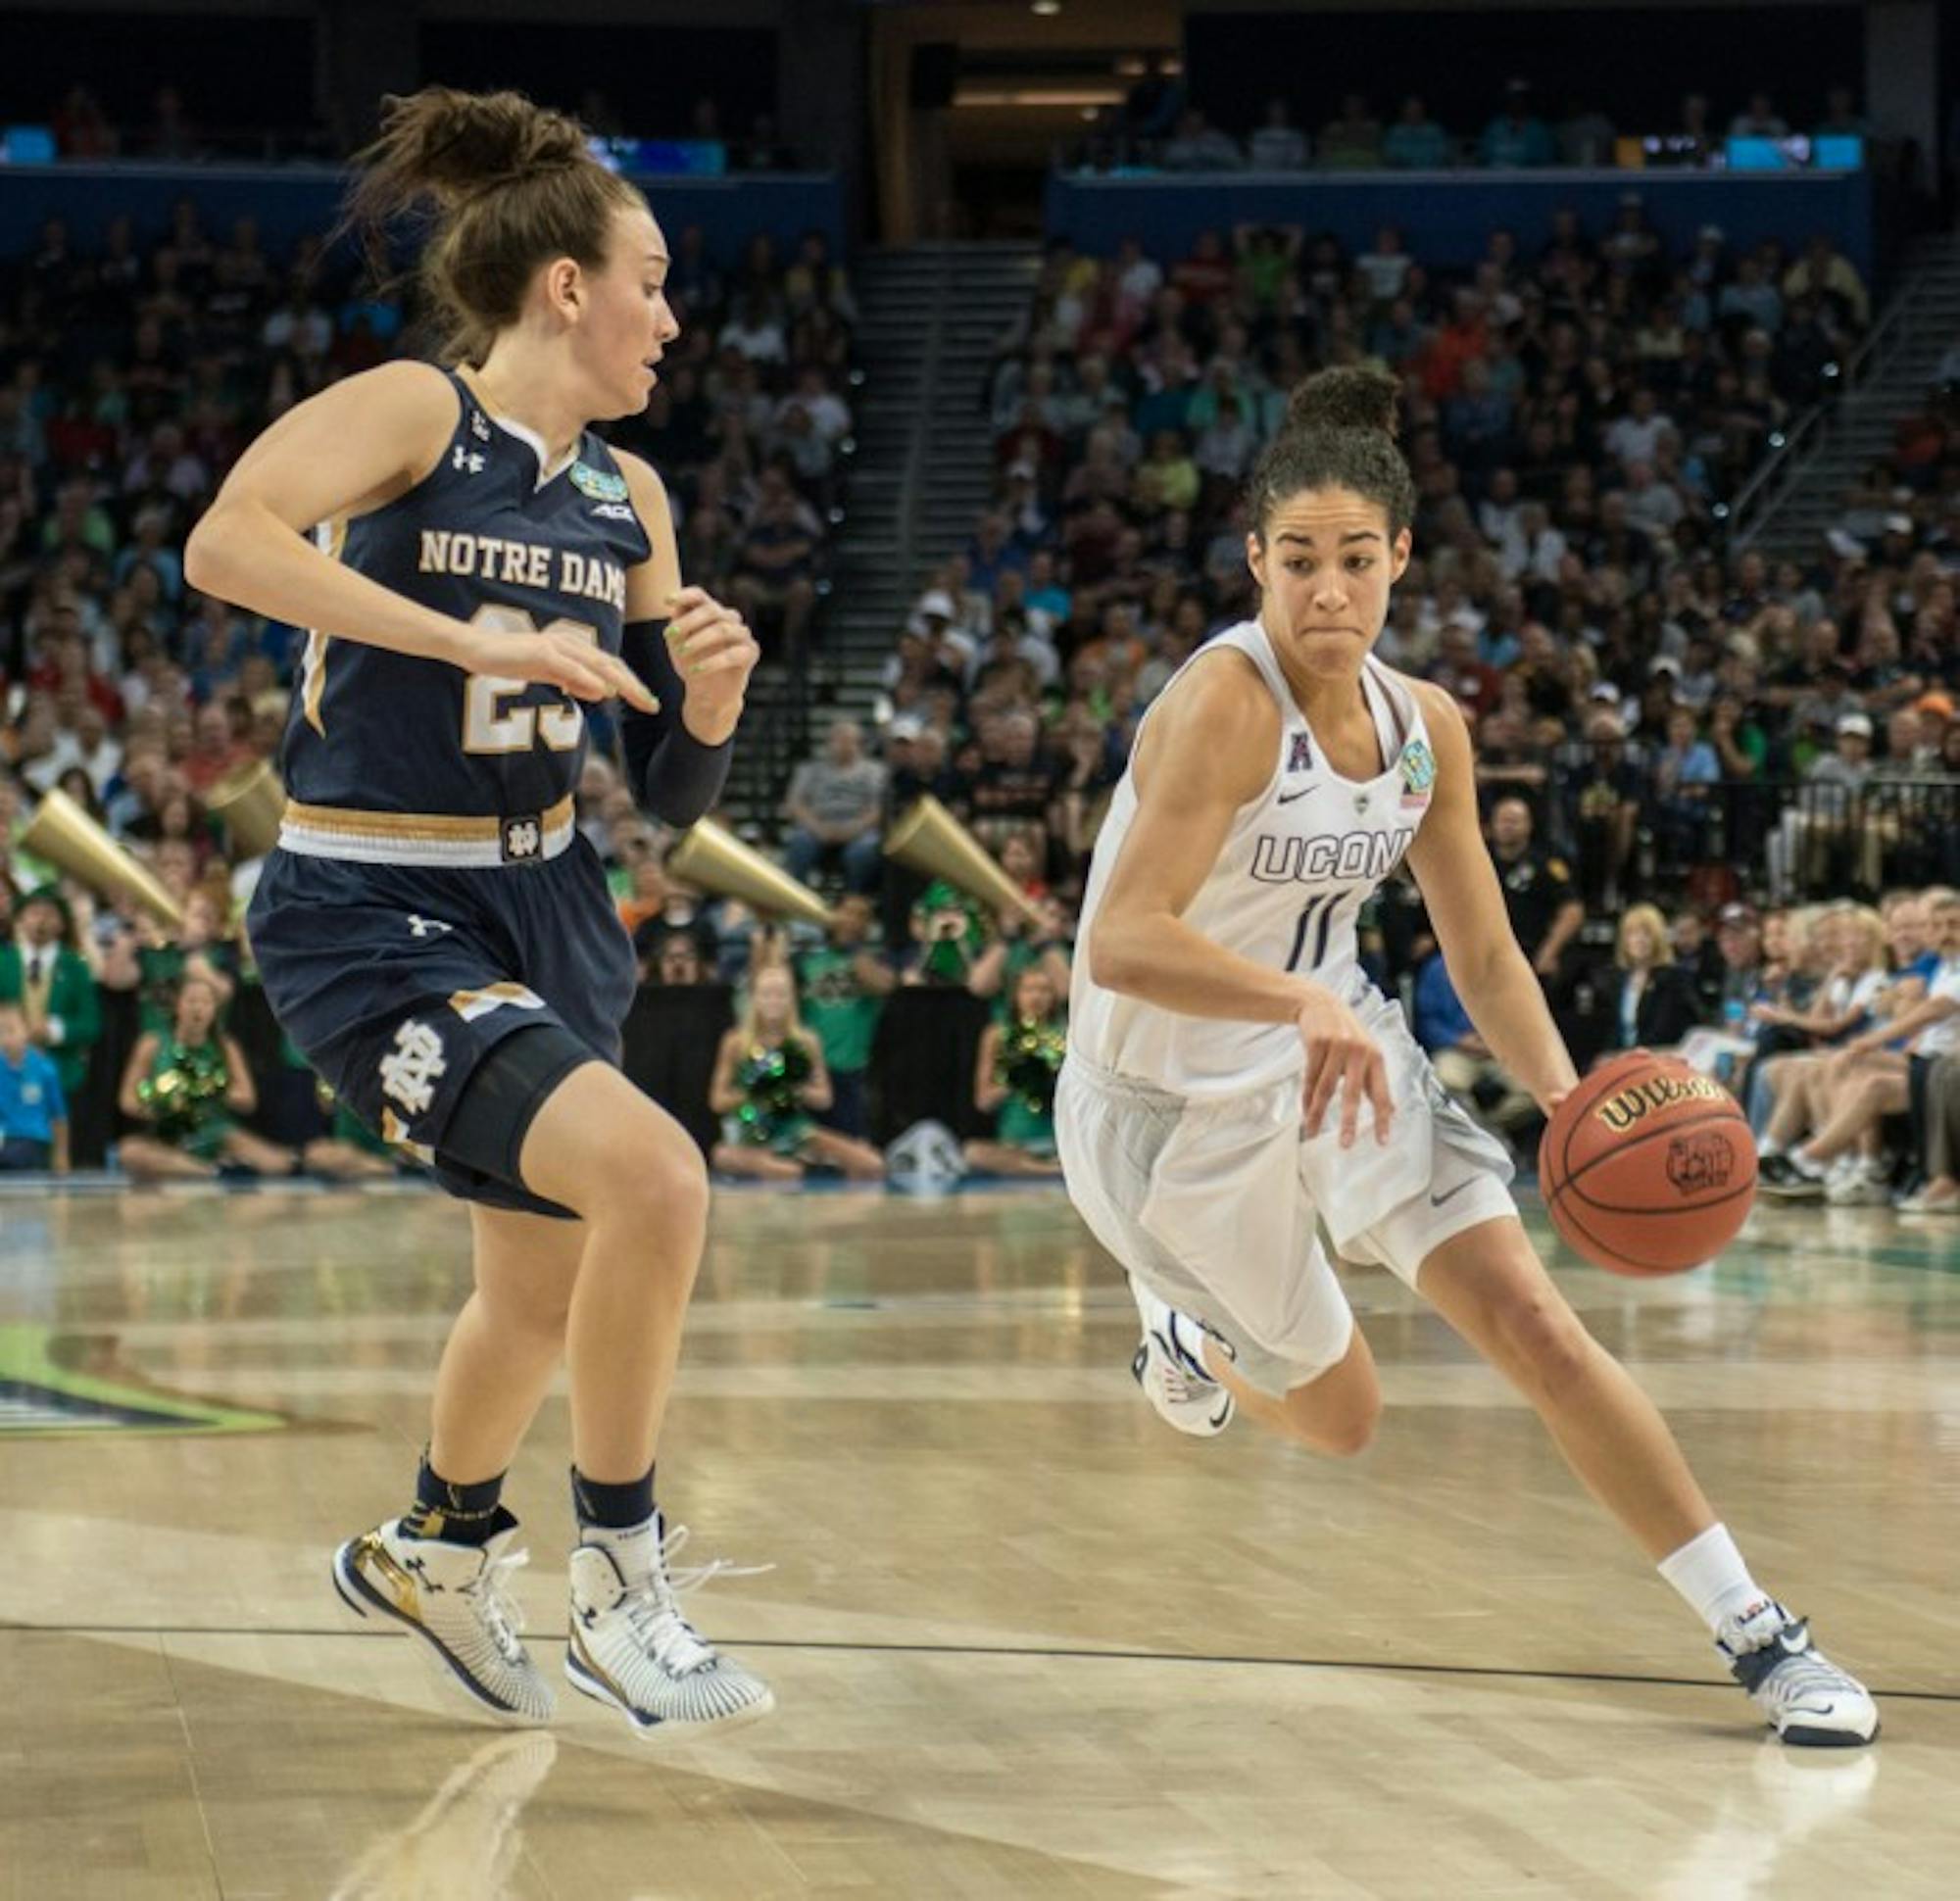 Senior guard Michela Mabrey attempts to defend an oncoming UConn player during Notre Dame’s 63-53 loss to UConn on April 7. Mabrey scored a total of 11 points in the loss on Saturday.